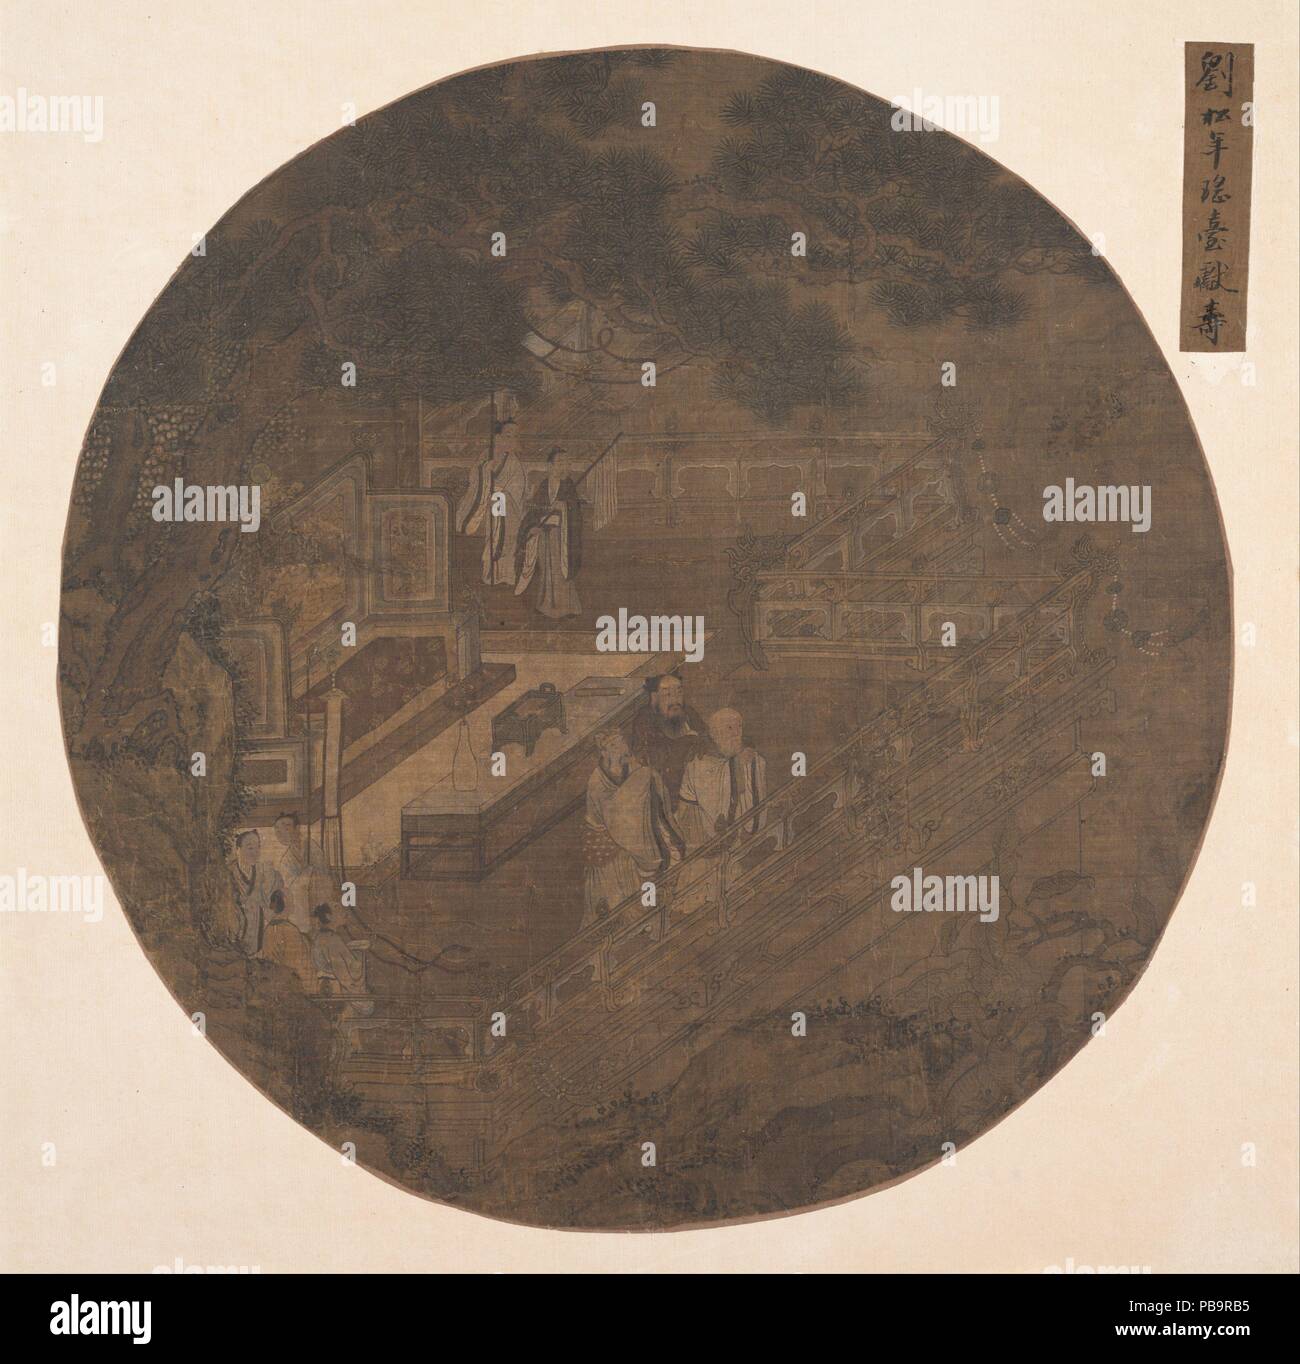 Paying homage to Xiwangmu, the Queen Mother of the West. Artist: Unidentified Artist Chinese, 15th century. Culture: China. Dimensions: Image: 11 3/8 × 11 3/8 in. (28.9 × 28.9 cm). Date: 15th century.  The auspicious subject of this fan painting is the birthday anniversary of Xiwangmu, the Queen Mother of the West. Standing atop an ornately furnished terrace, the three Daoist immortals Lü Dongbin, Han Zhongli, and Zhang Guolao are depicted reverently paying their respects to the queen of the Daoist pantheon. The figures, drawn with a minimum of calligraphic flourish, seem to be the work of a p Stock Photo